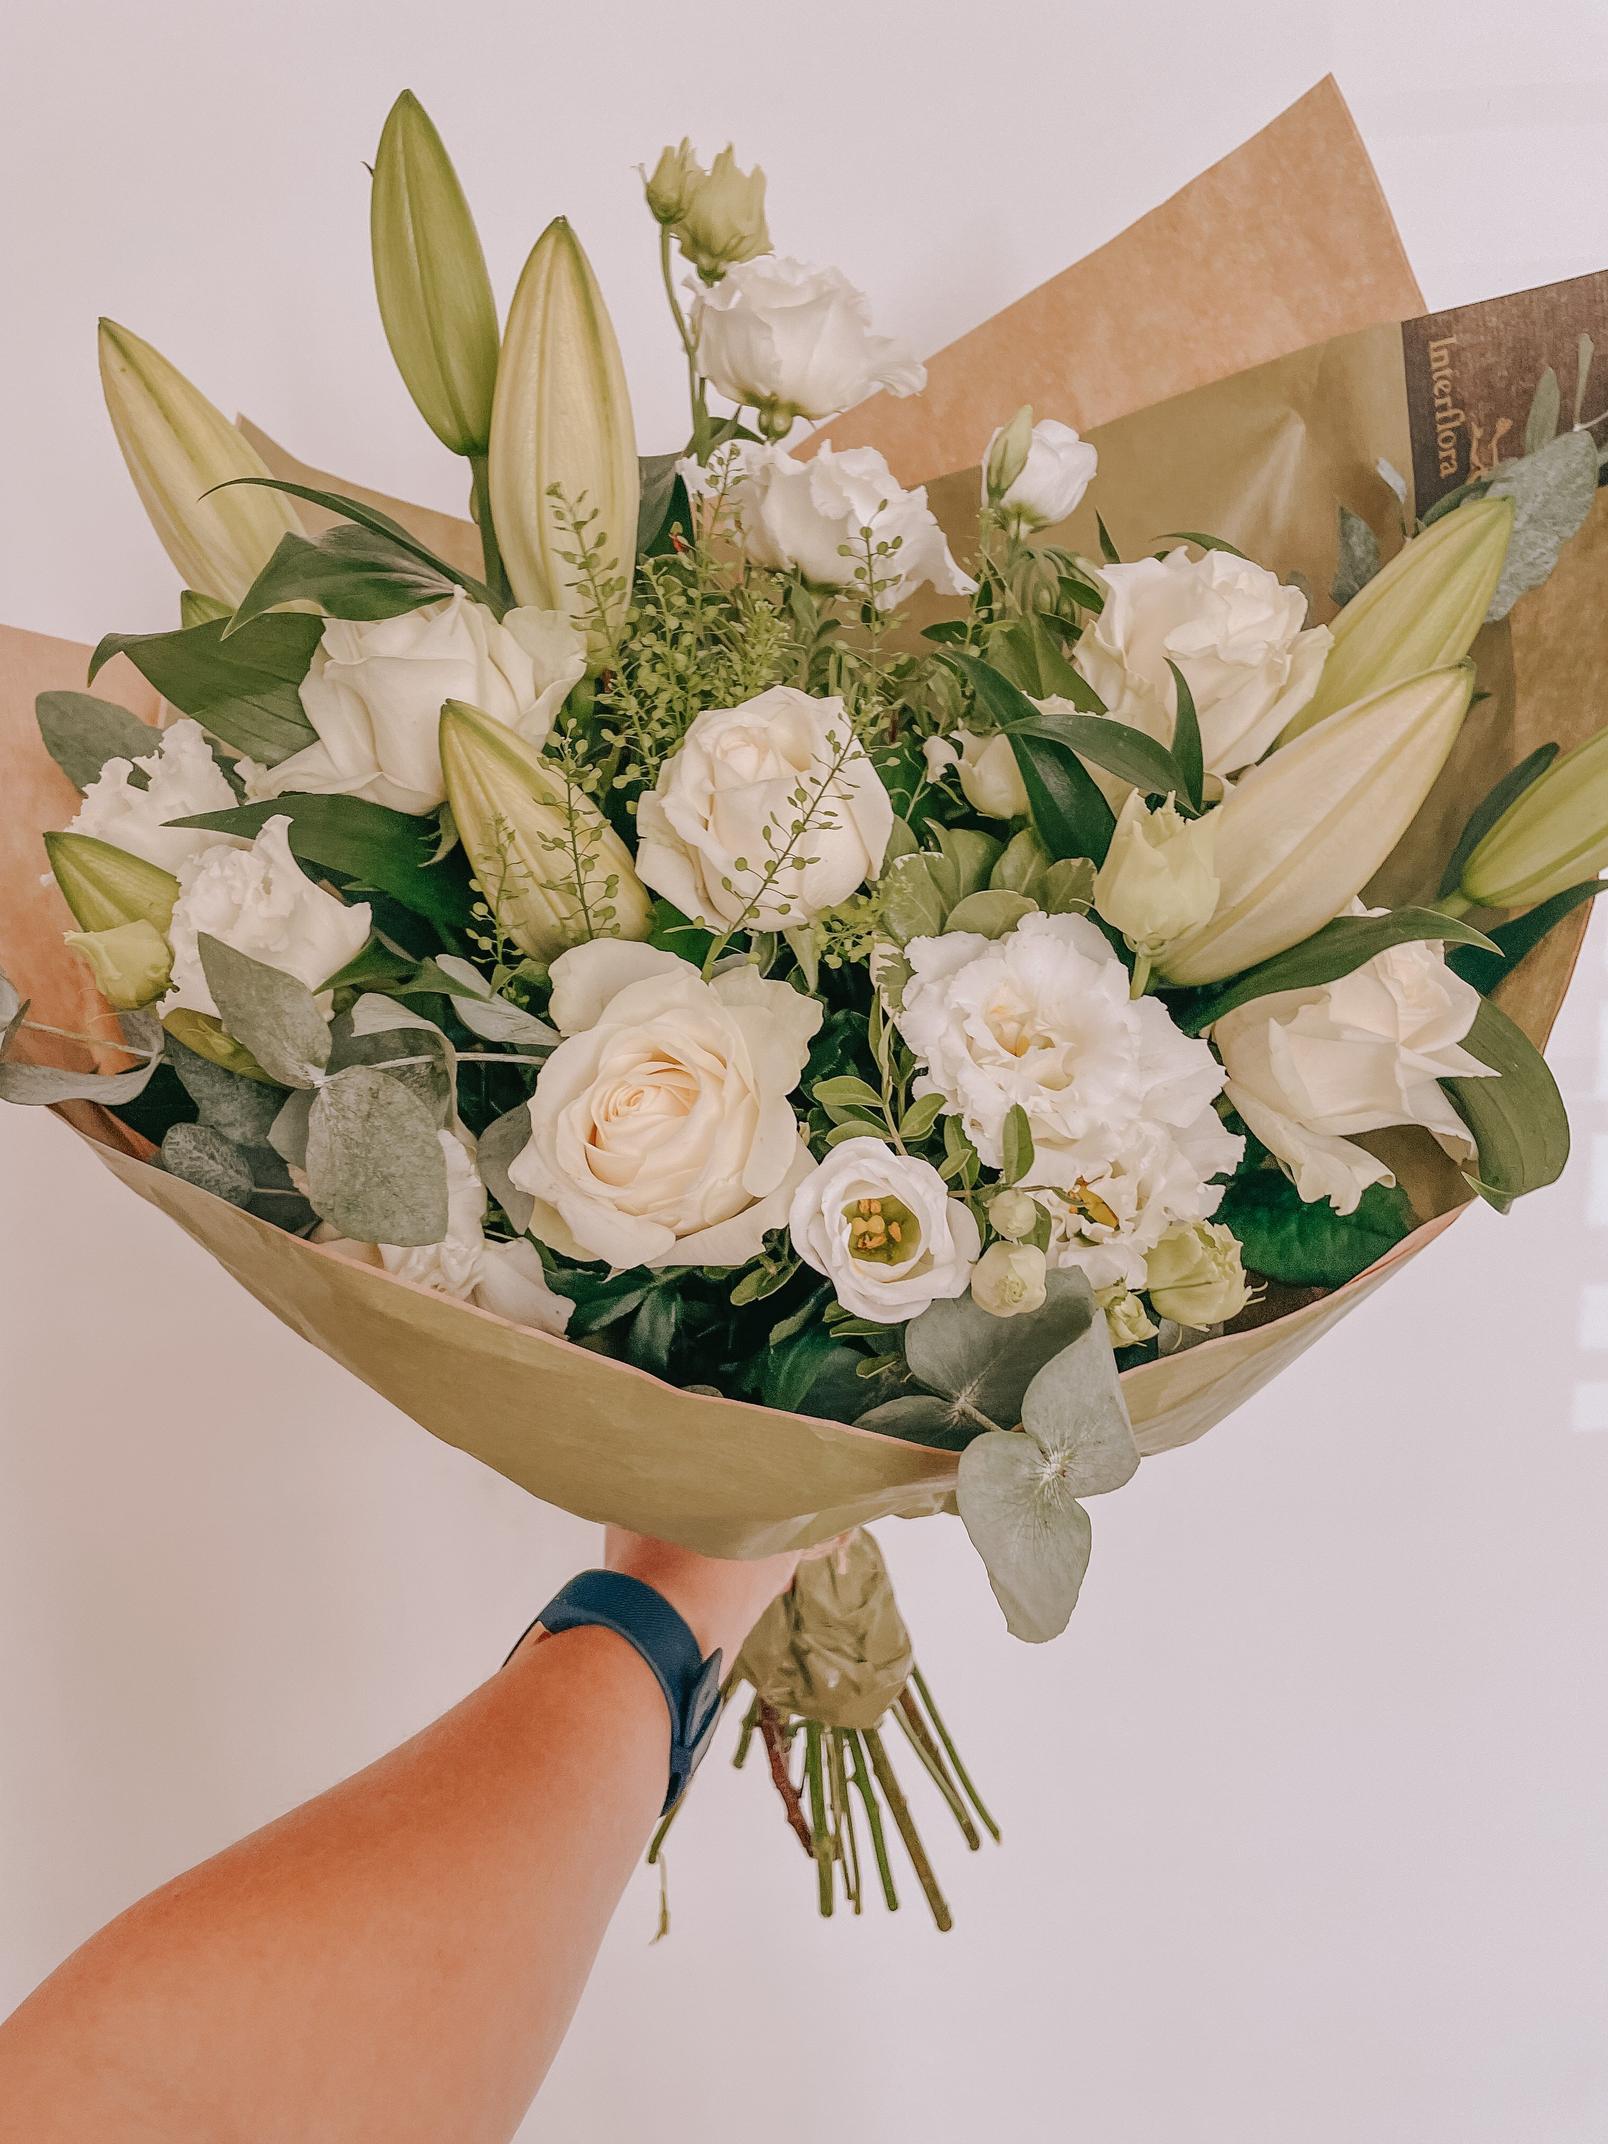 How to cope without mum this Mother's Day | Interflora